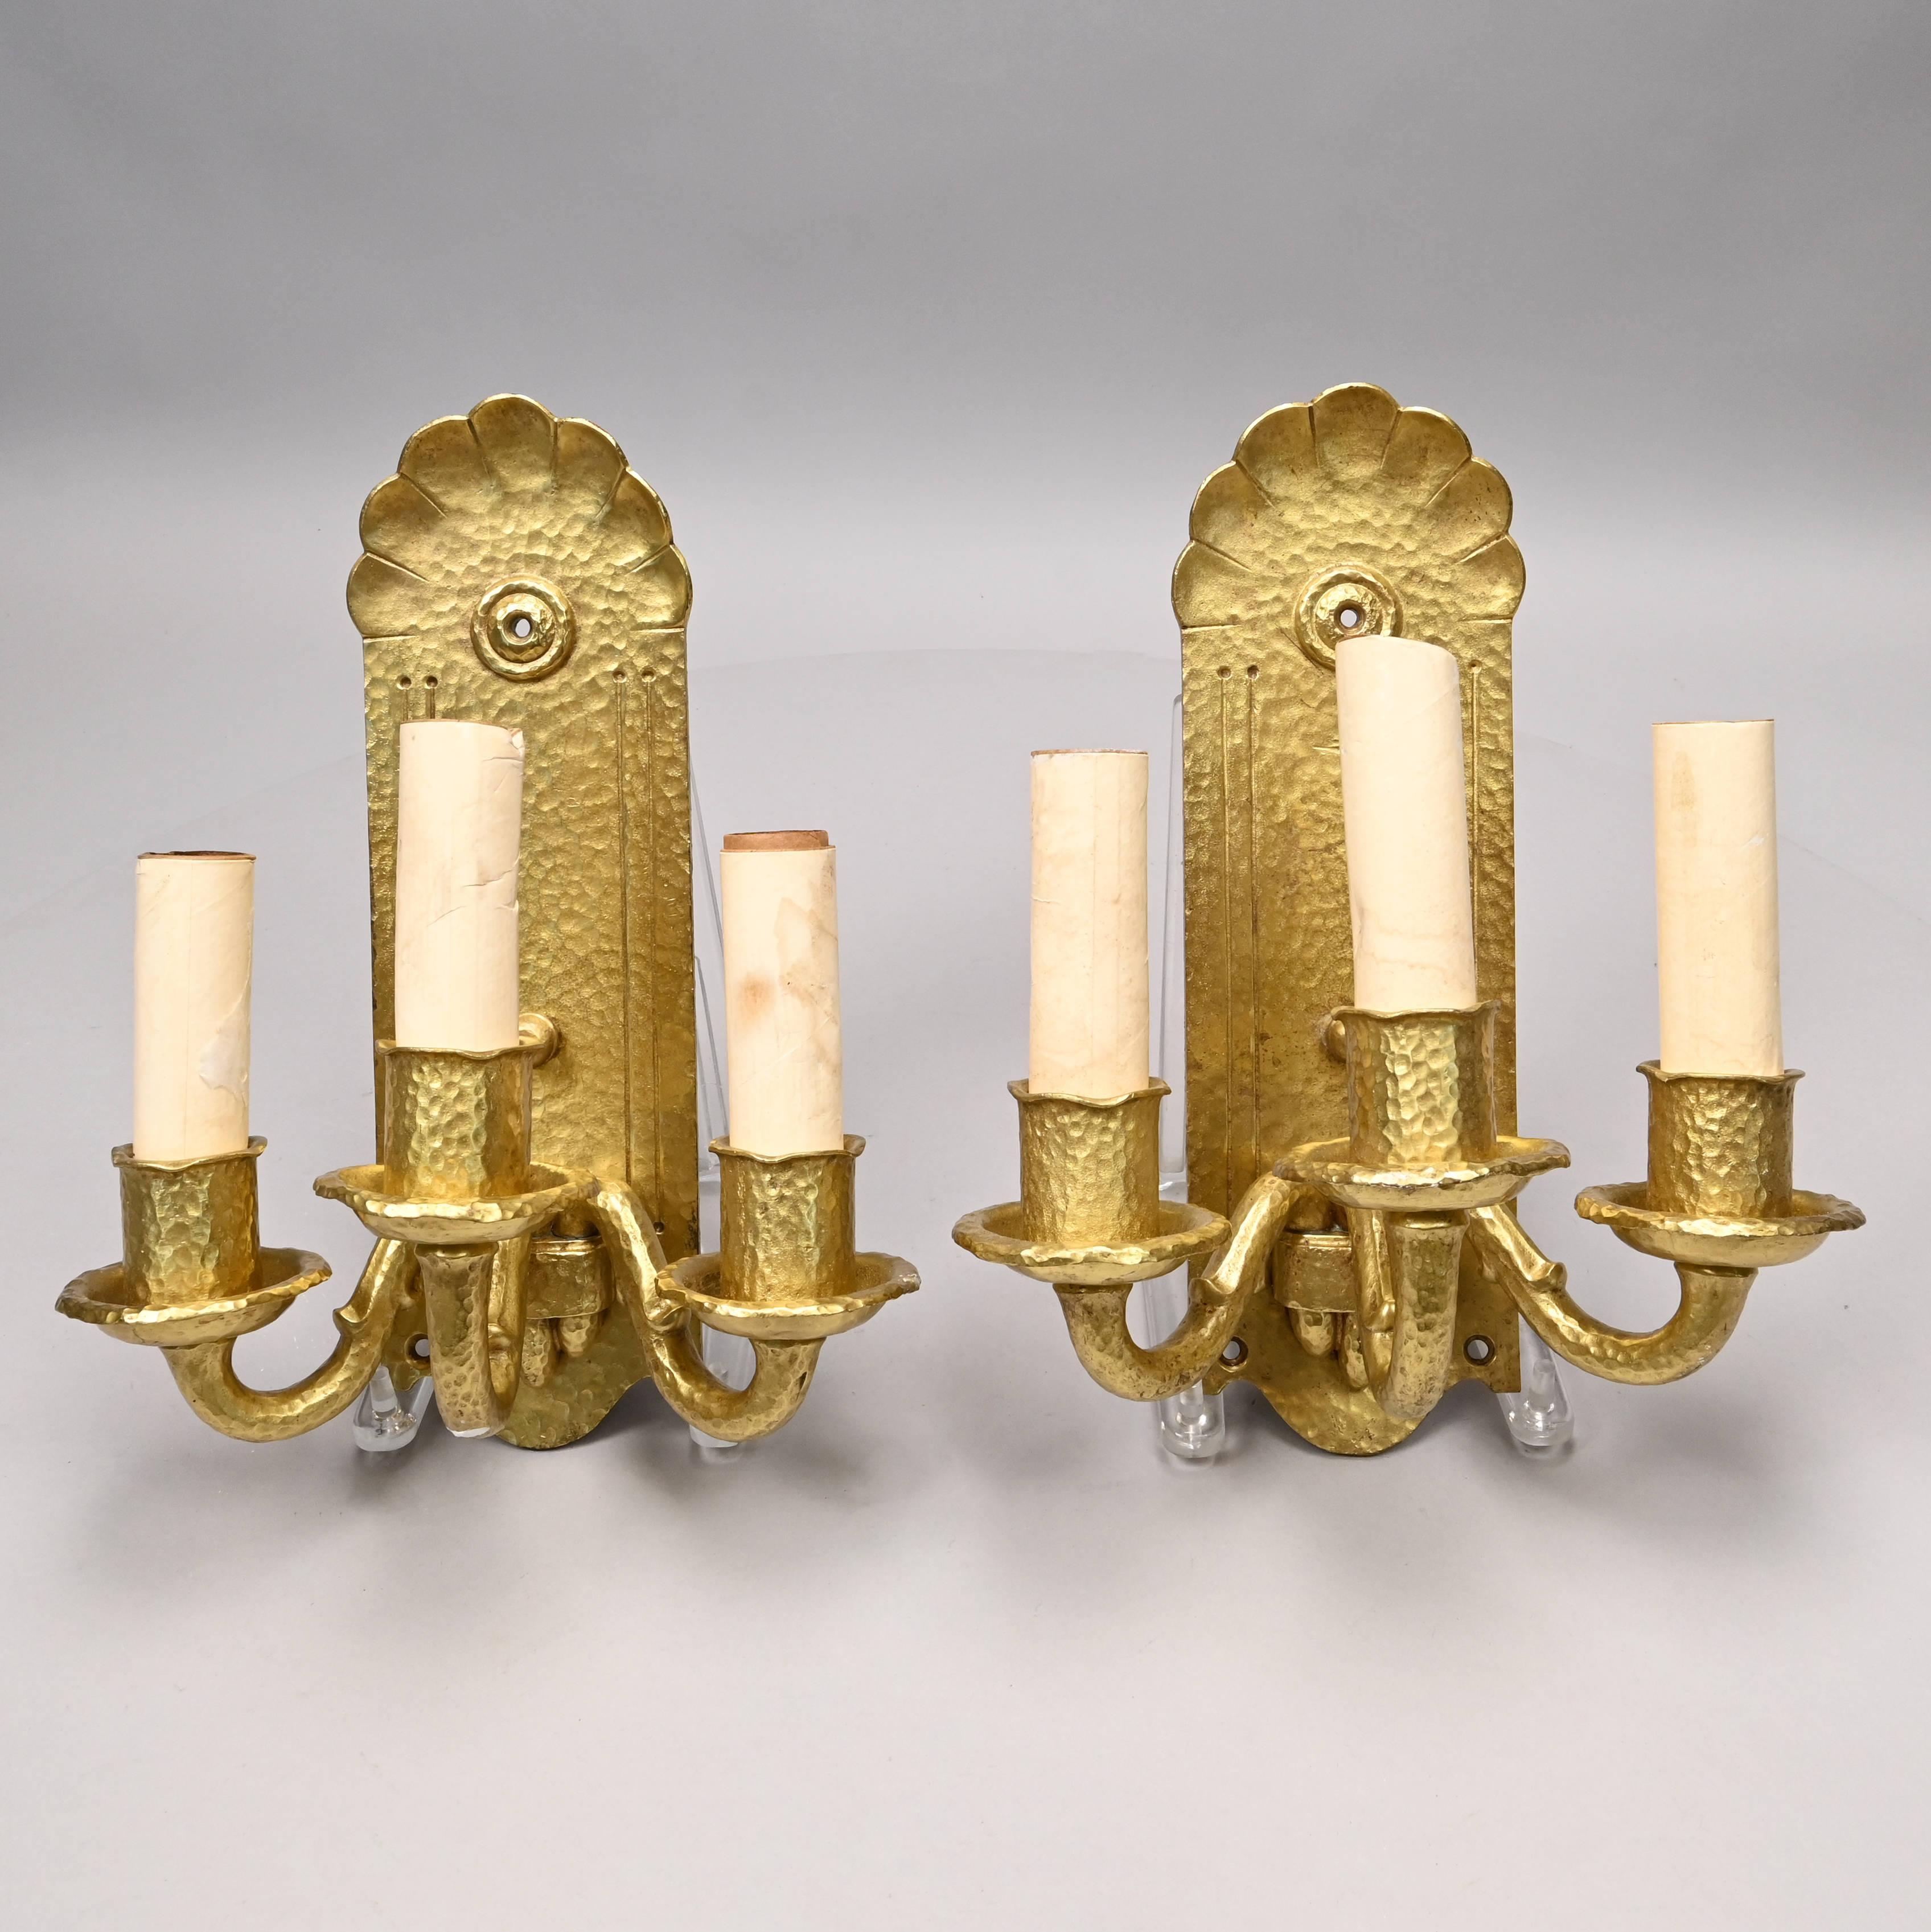 Anonymous
Early 20th cent.; probably American
Gilt metal

Approximate size: 13 (h) x 9.75 (w) x 6.75 (d) in.

A vintage pair of Art Nouveau or Art Deco 3-light wall sconces in gilt metal.  These distinctive sconces are exquisitely realized with a